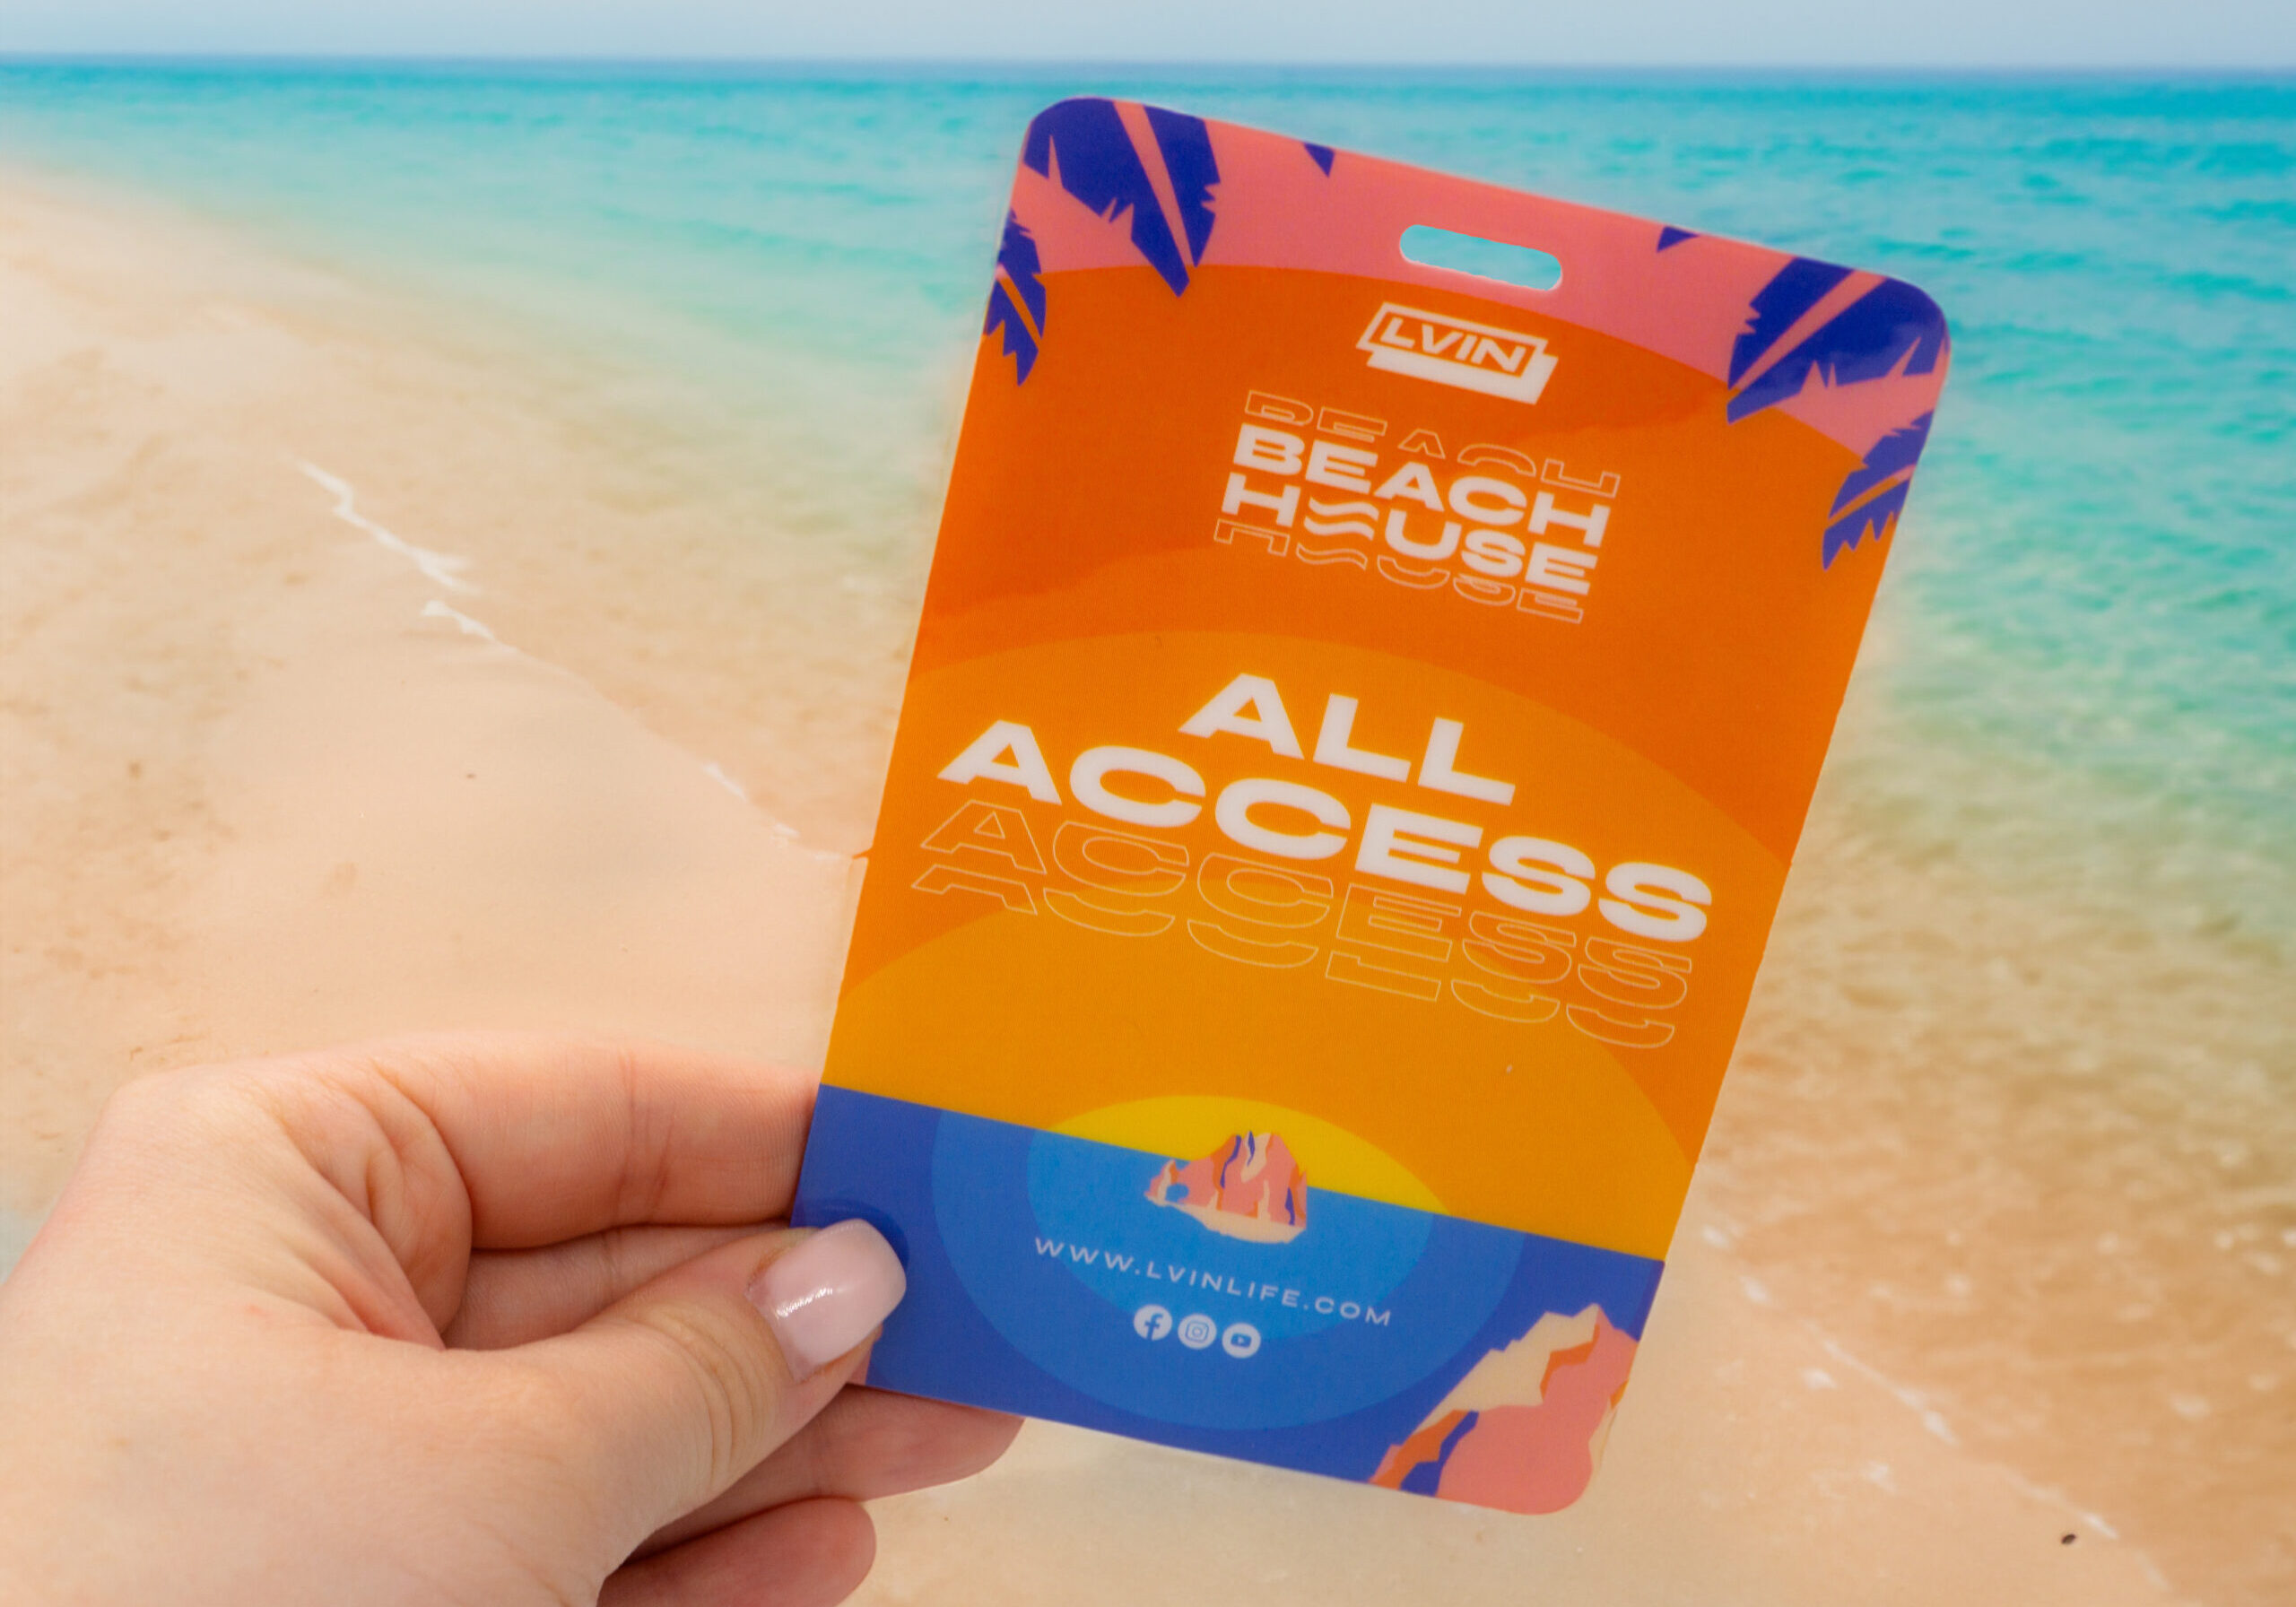 All access pass being held out with a beach scene in the background